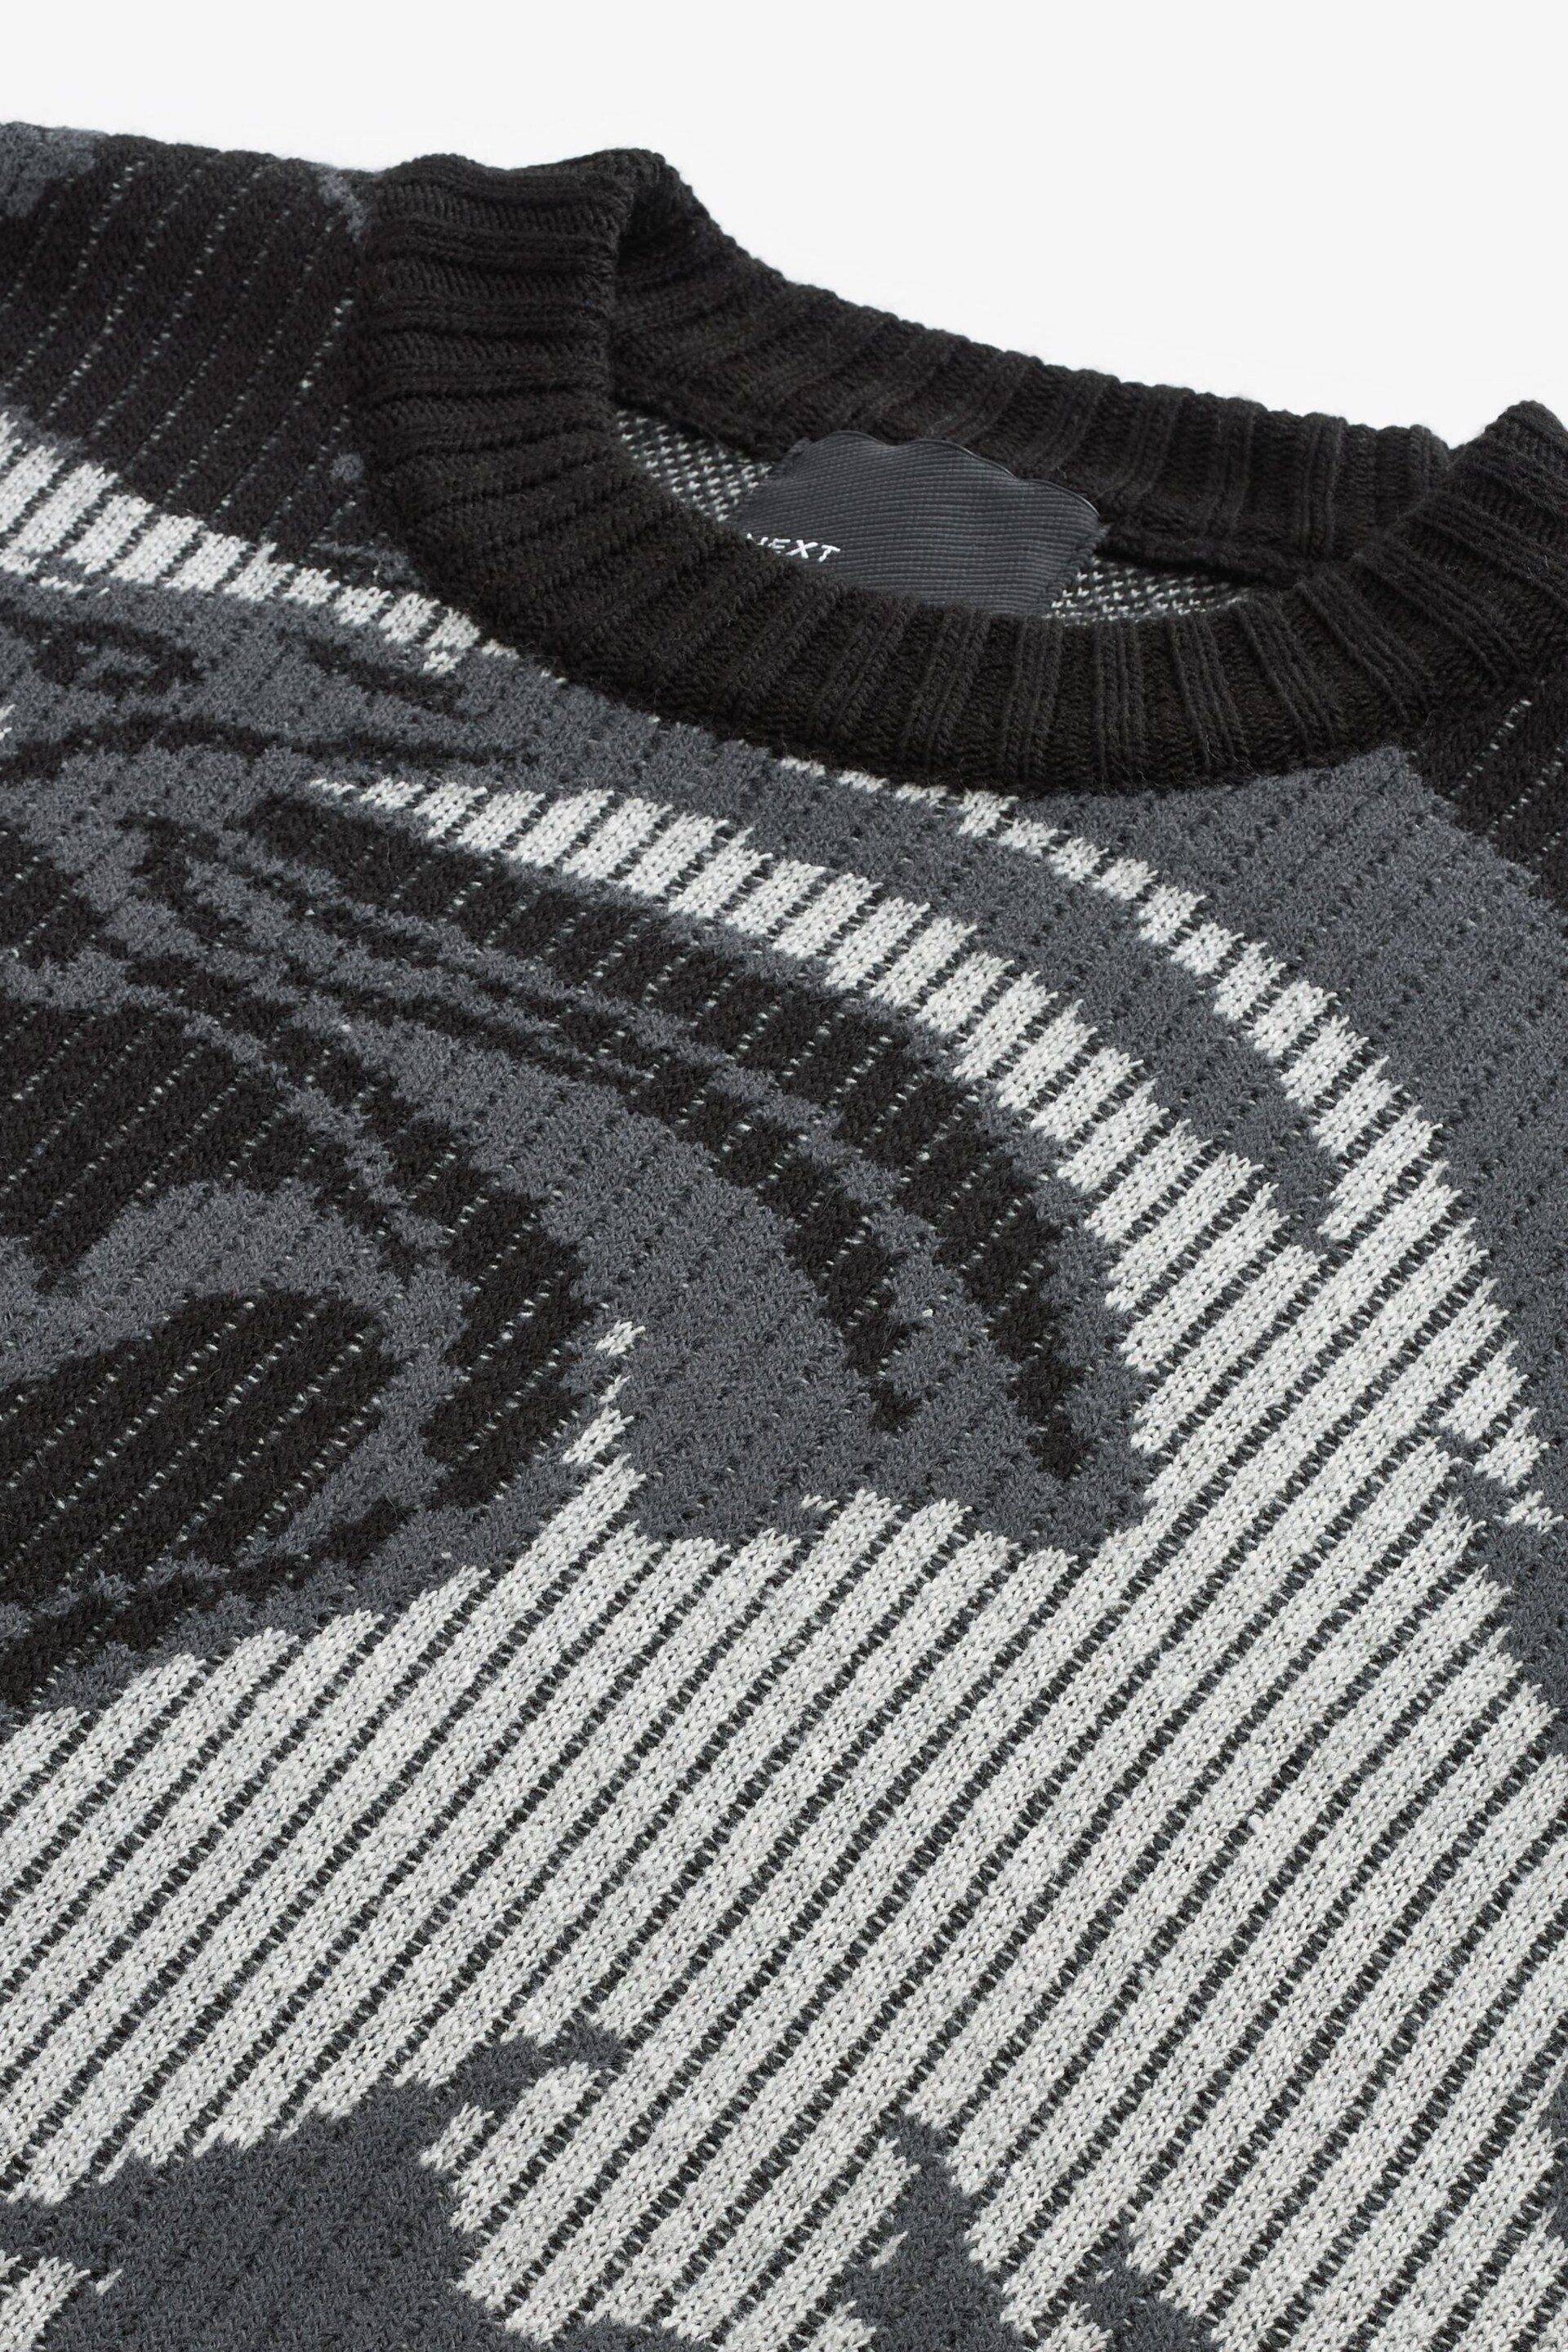 Black Relaxed EDIT Graphic Knitted Crew Sweater - Image 7 of 8